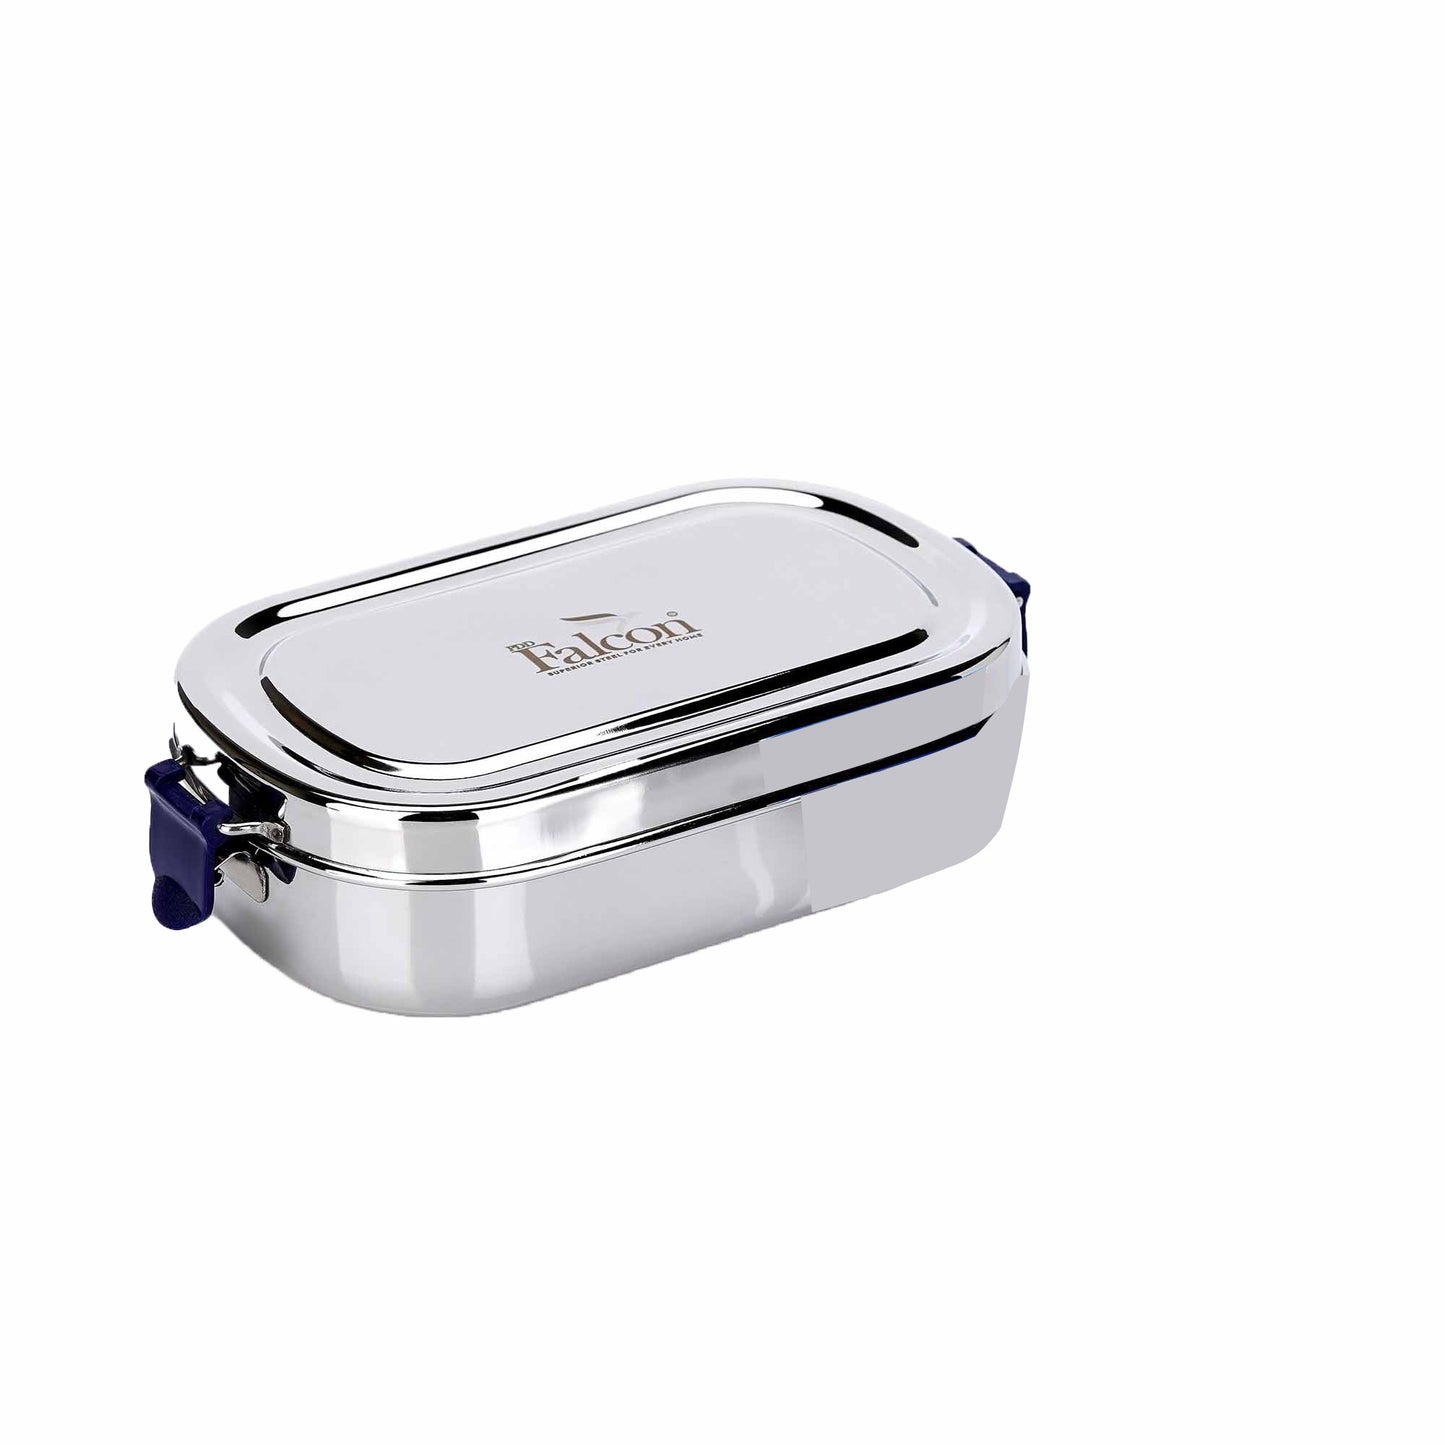 EcoNxt Recta Meal Lunch Box Set of 3 1300ml (FP11050)